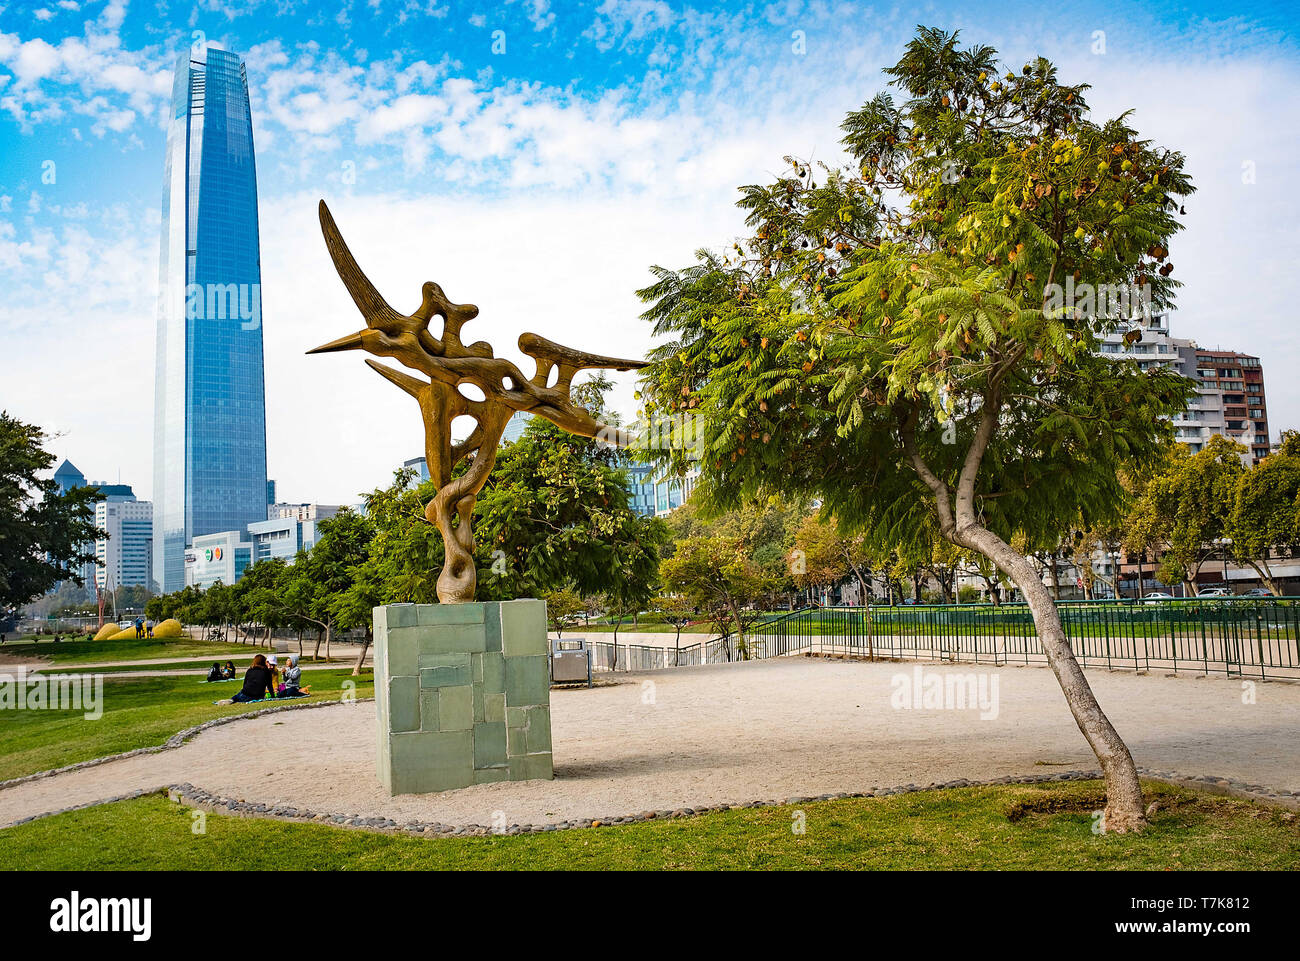 April 2019: The 64-story Gran Torre Santiago is the tallest building in Latin American and the second tallest building in the Southern Hemisphere as viewed from Parque Metropolitano, Santiago, Chile. Stock Photo